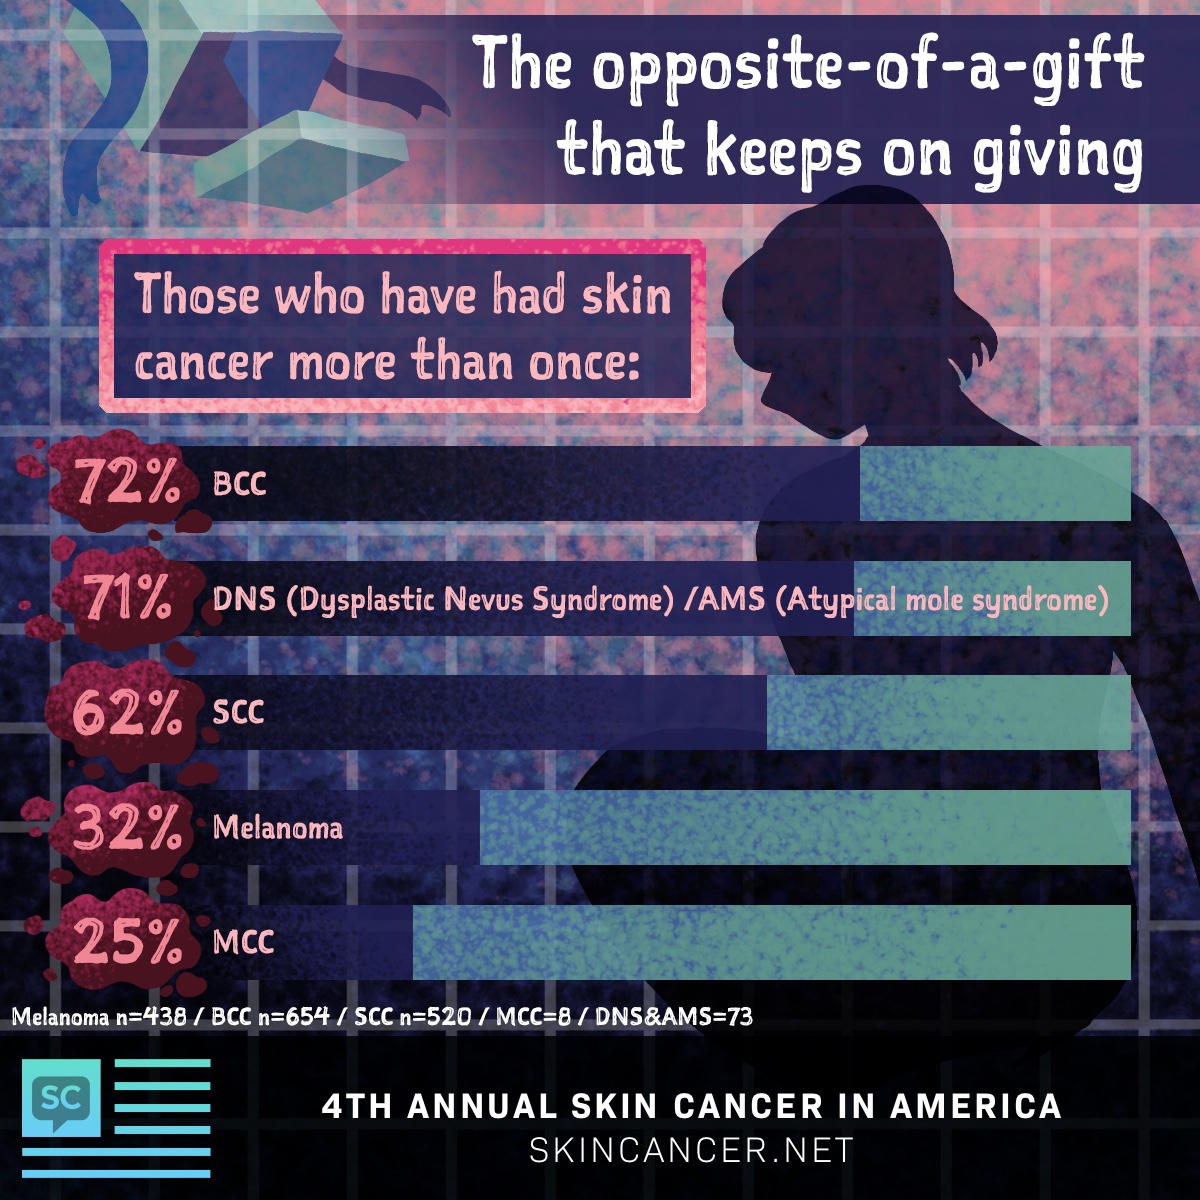 SkinCancer.net 2020 In America survey results, 72% of BCC respondents have had skin cancer more than once.